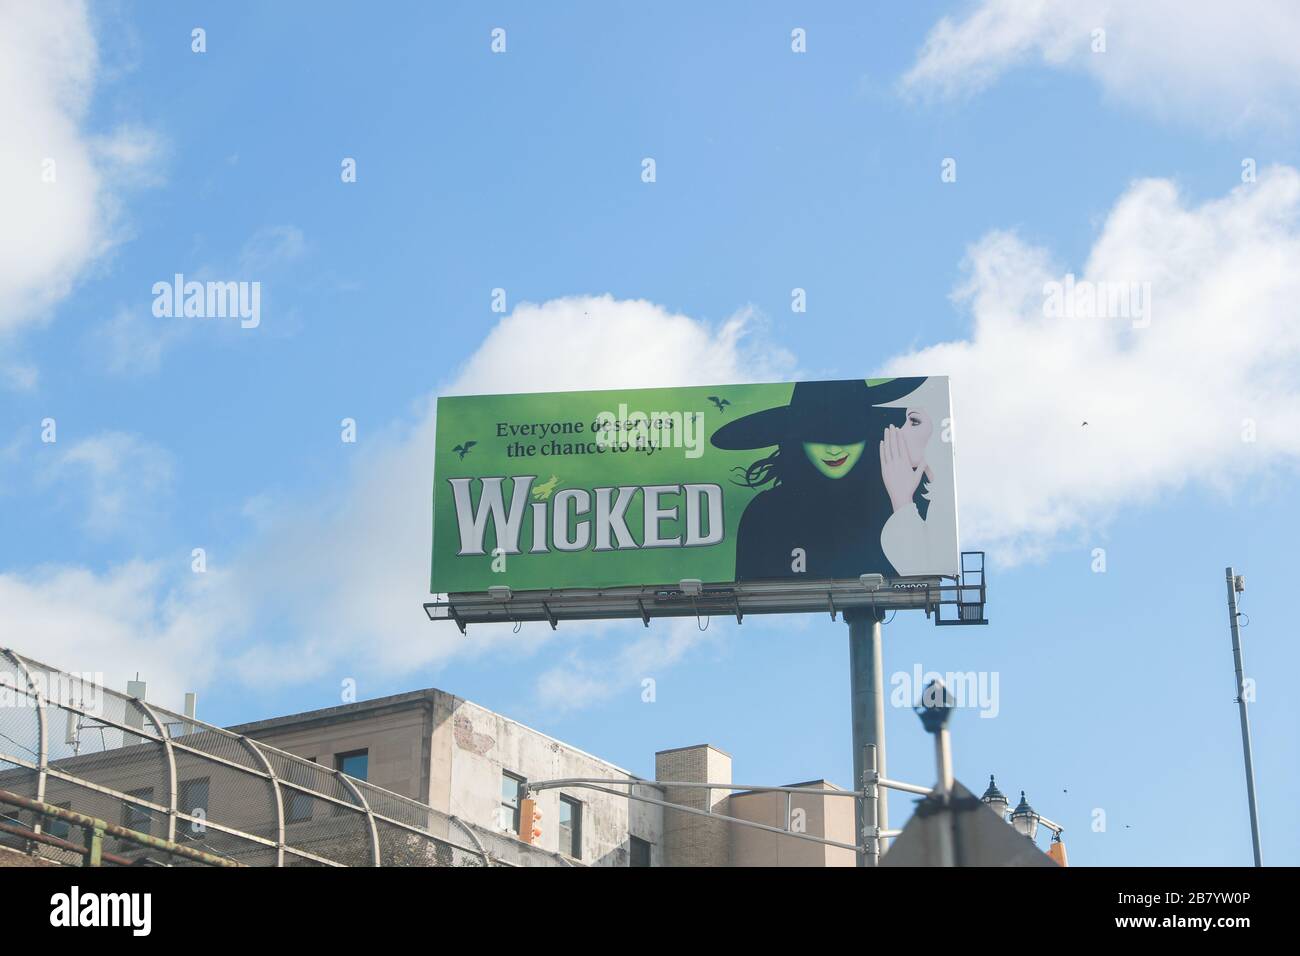 Manhattan, NY November 28, 2019: An advertisement billboard of Wicked Musical in New York City. Wicked is a 2003 Broadway musical by Stephen Schwartz Stock Photo